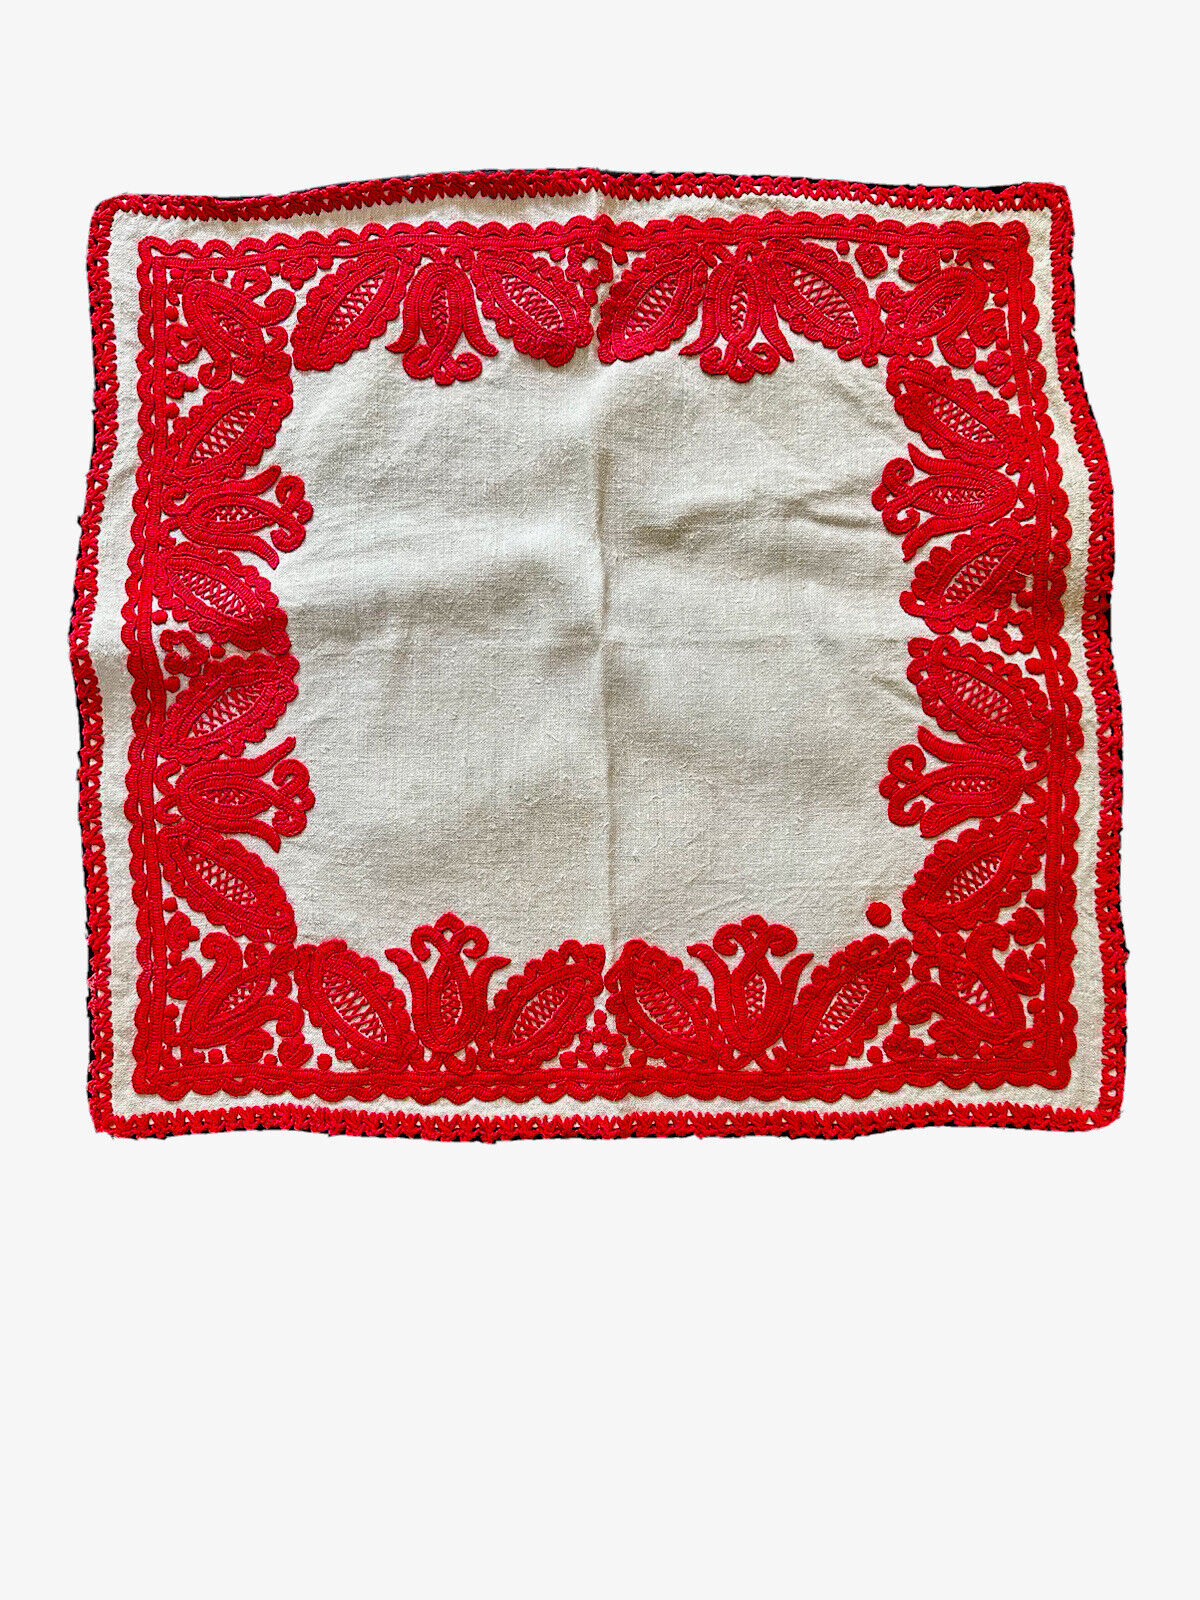 Vintage Densely Embroidered Table Mat Handmade Sweden 23” Red & White Christmas